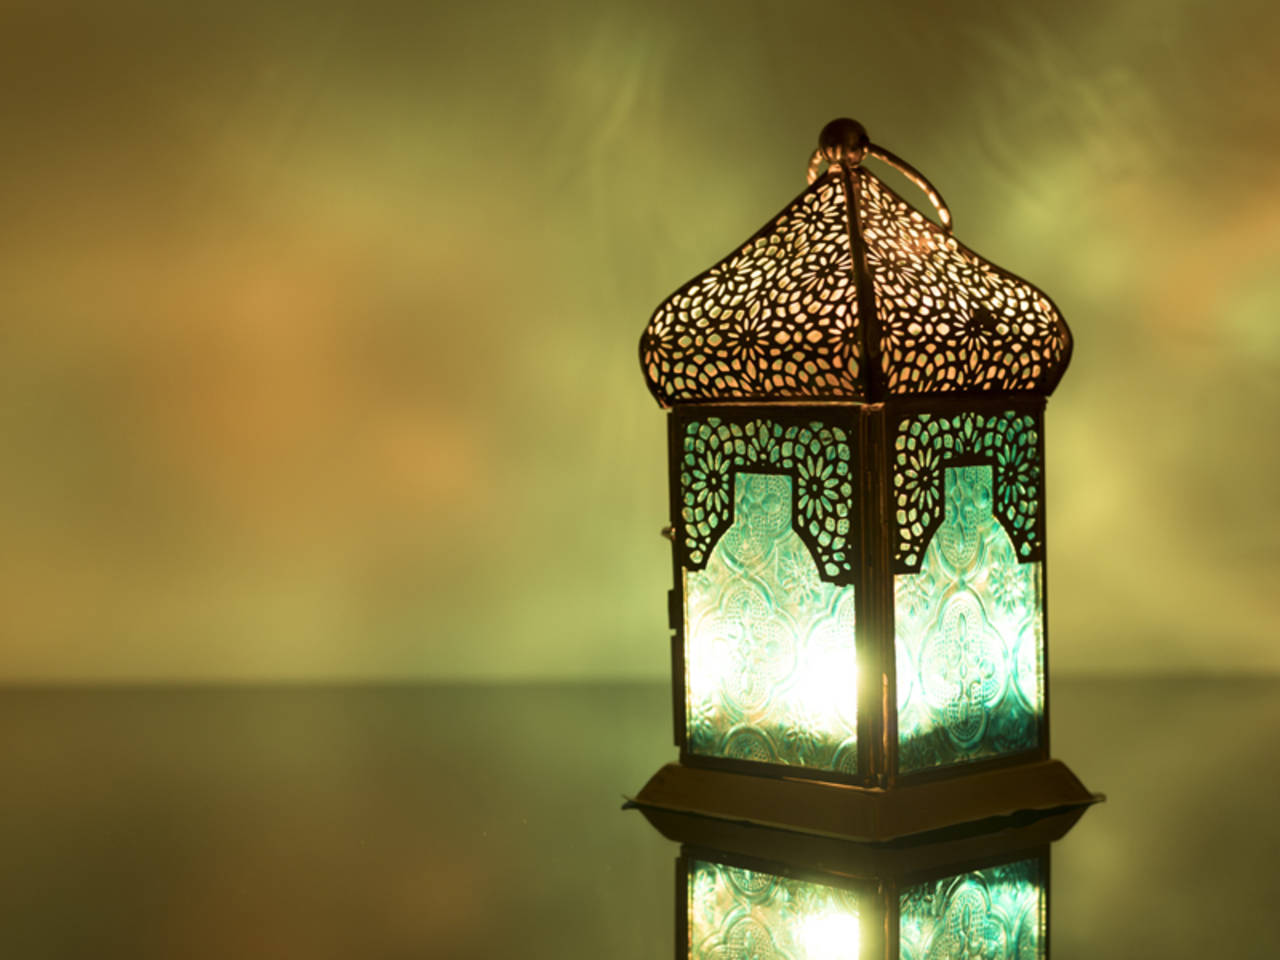 Eid decorations ideas: Ways to decorate your home for Eid ul-Fitr ...